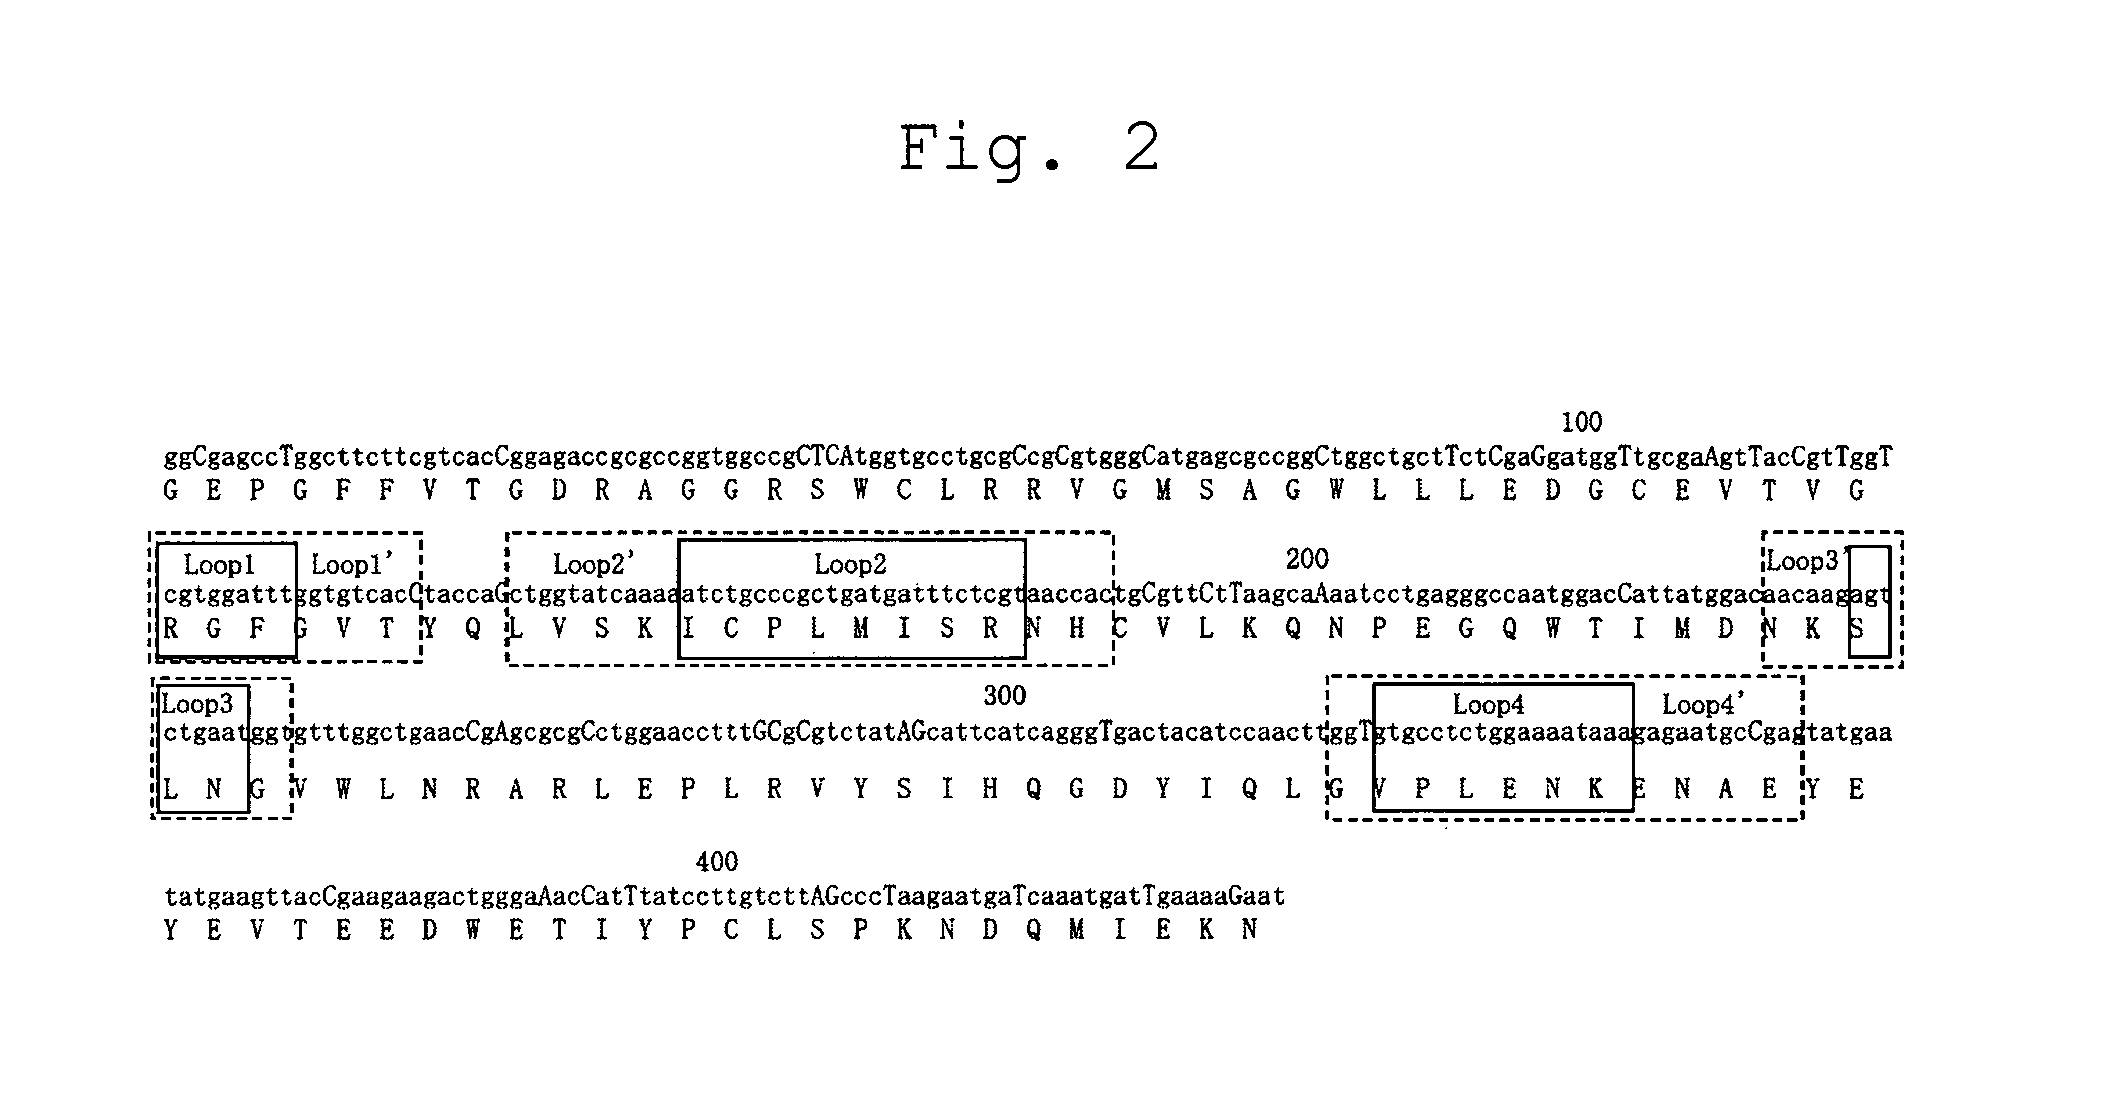 RNF8-FHA domain-modified protein and method of producing the same